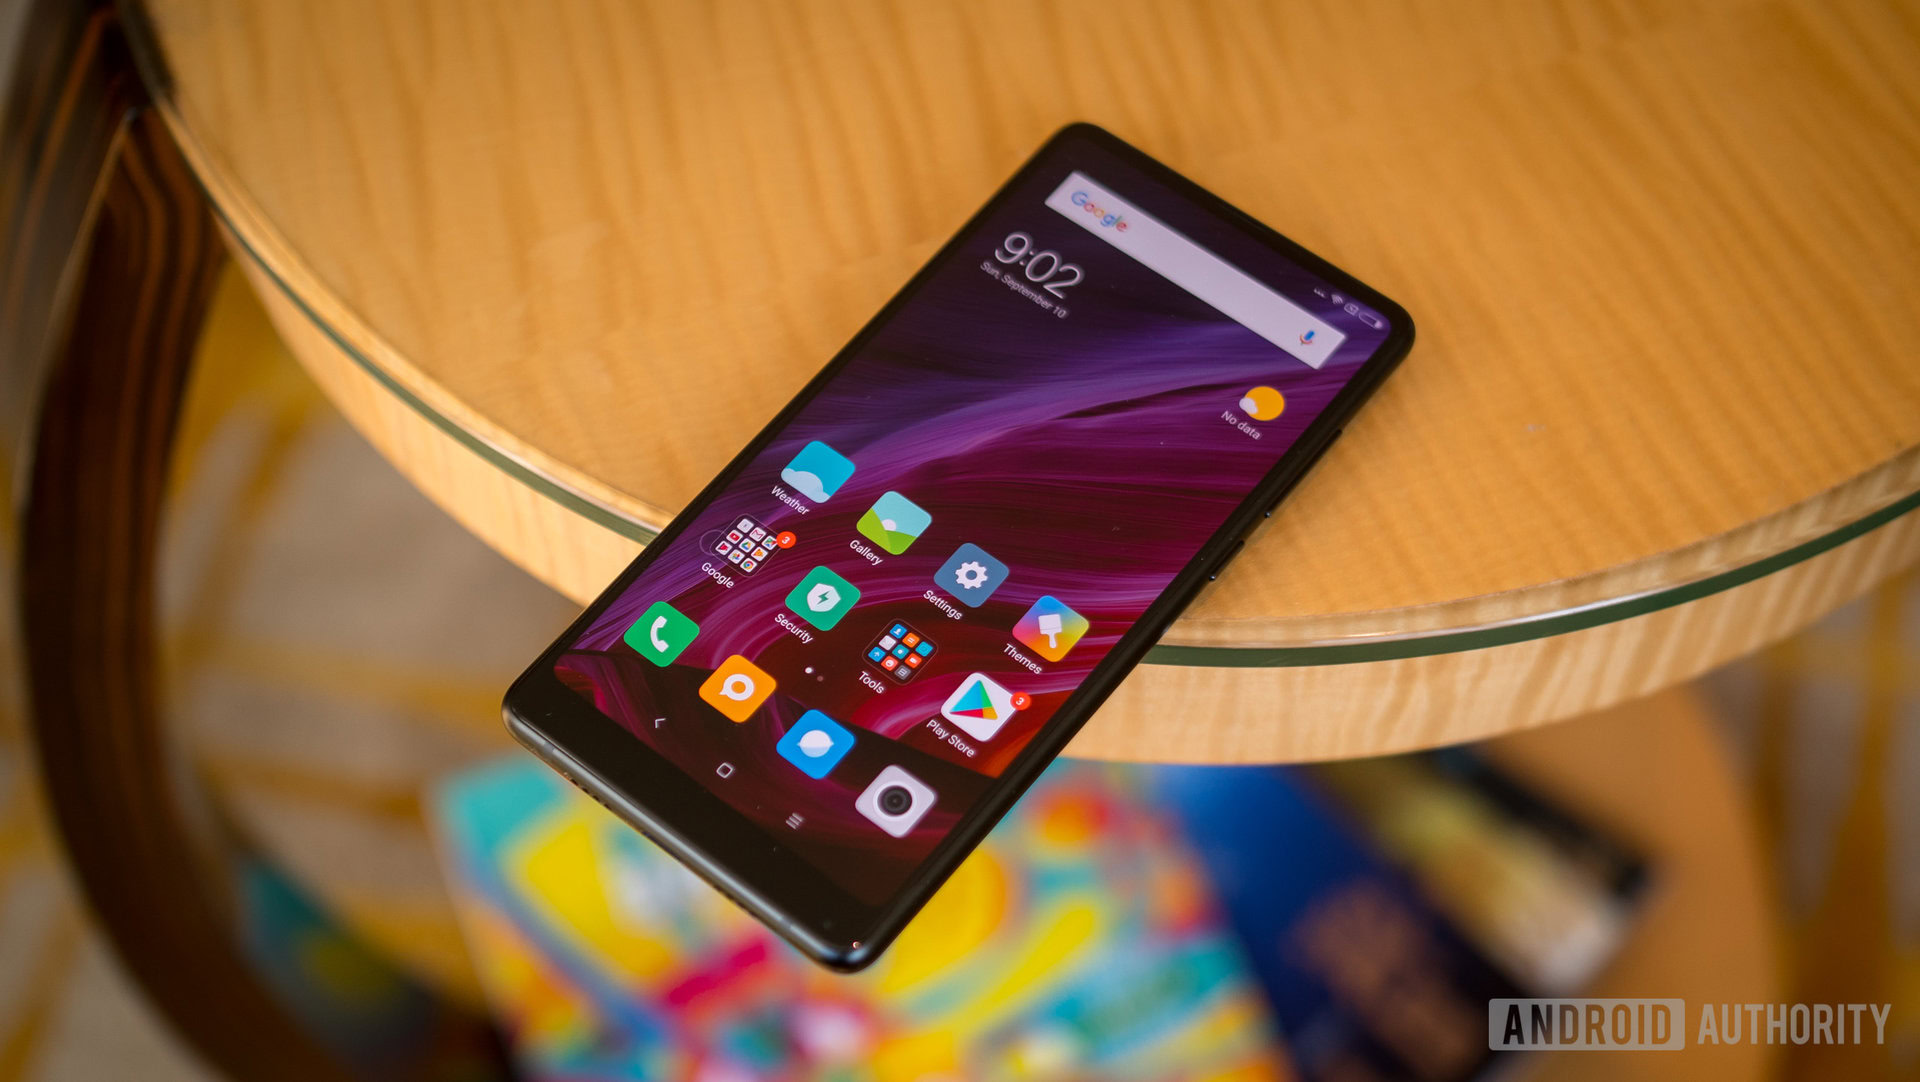 MIUI themes: A beginner's guide to spicing up your Xiaomi phone